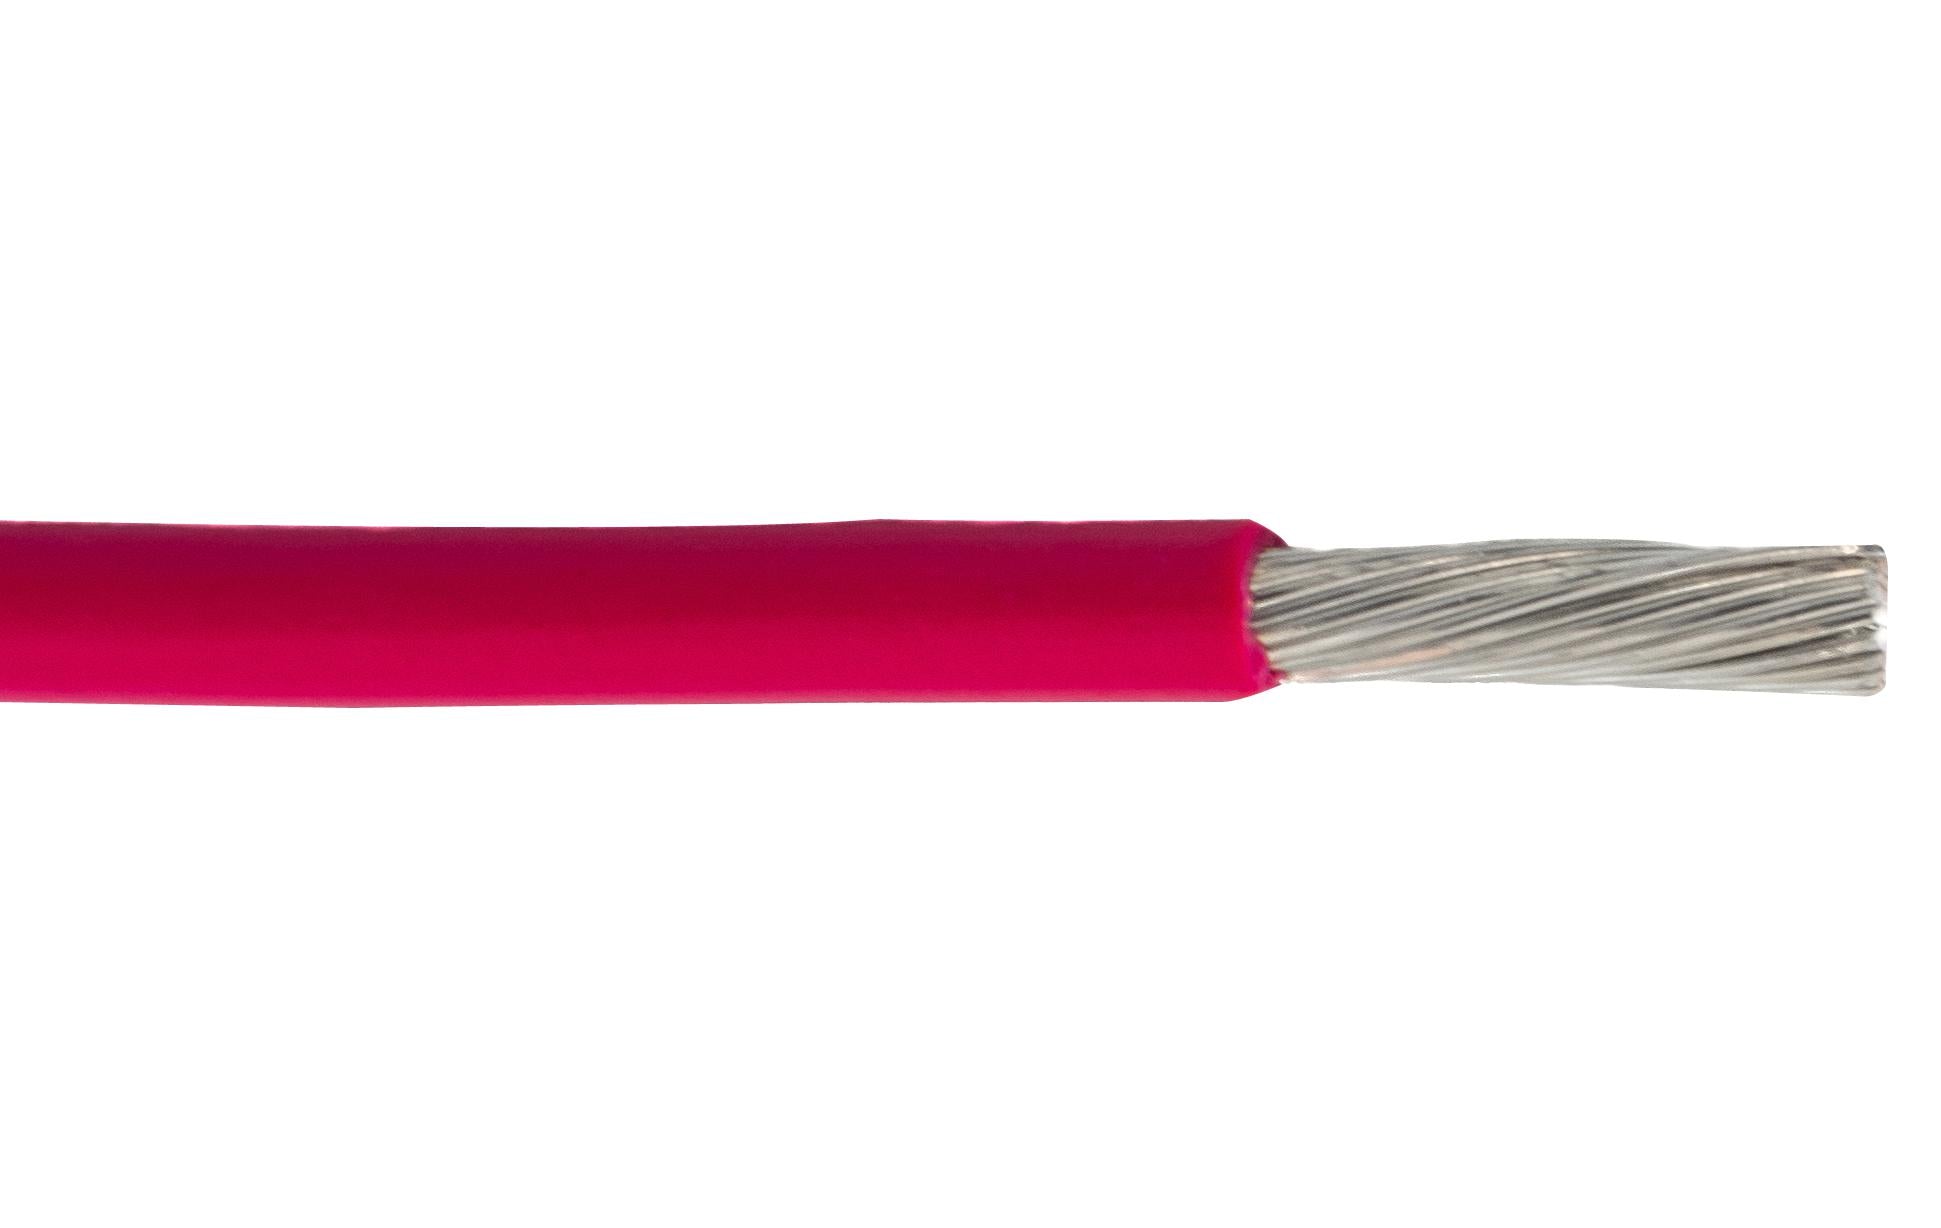 67025 RD034 HOOK-UP WIRE, 0.25MM2, RED, 500M ALPHA WIRE